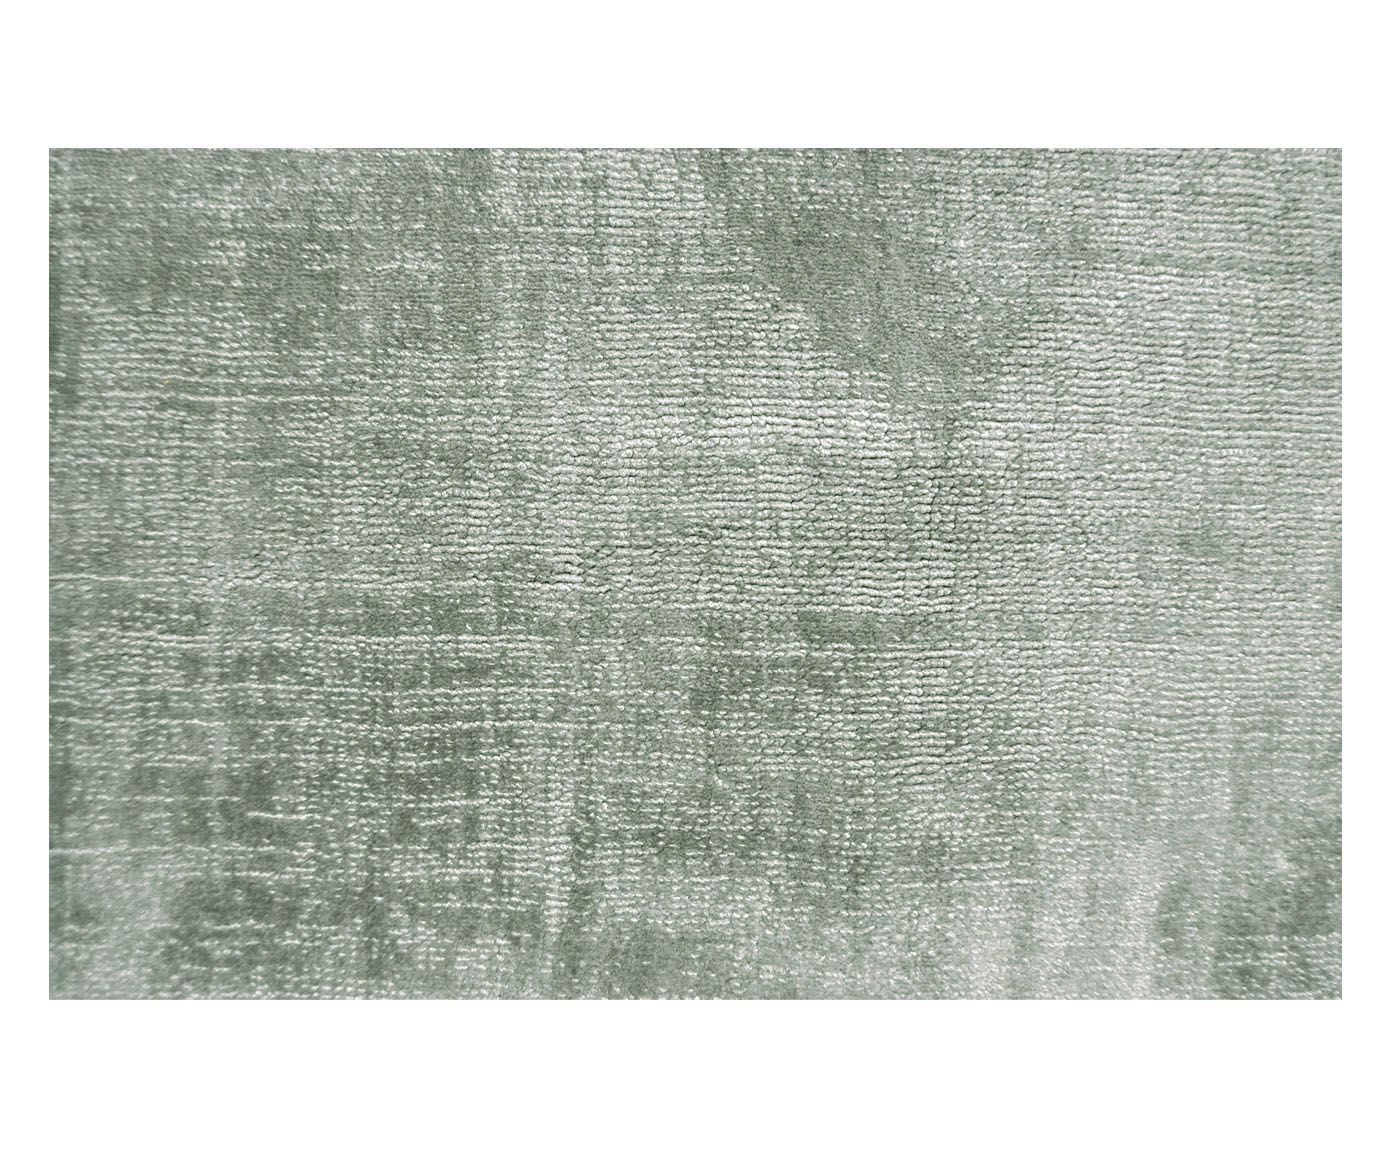 Tapete Indiano Vintage Prateado - 250X300cm | Westwing.com.br